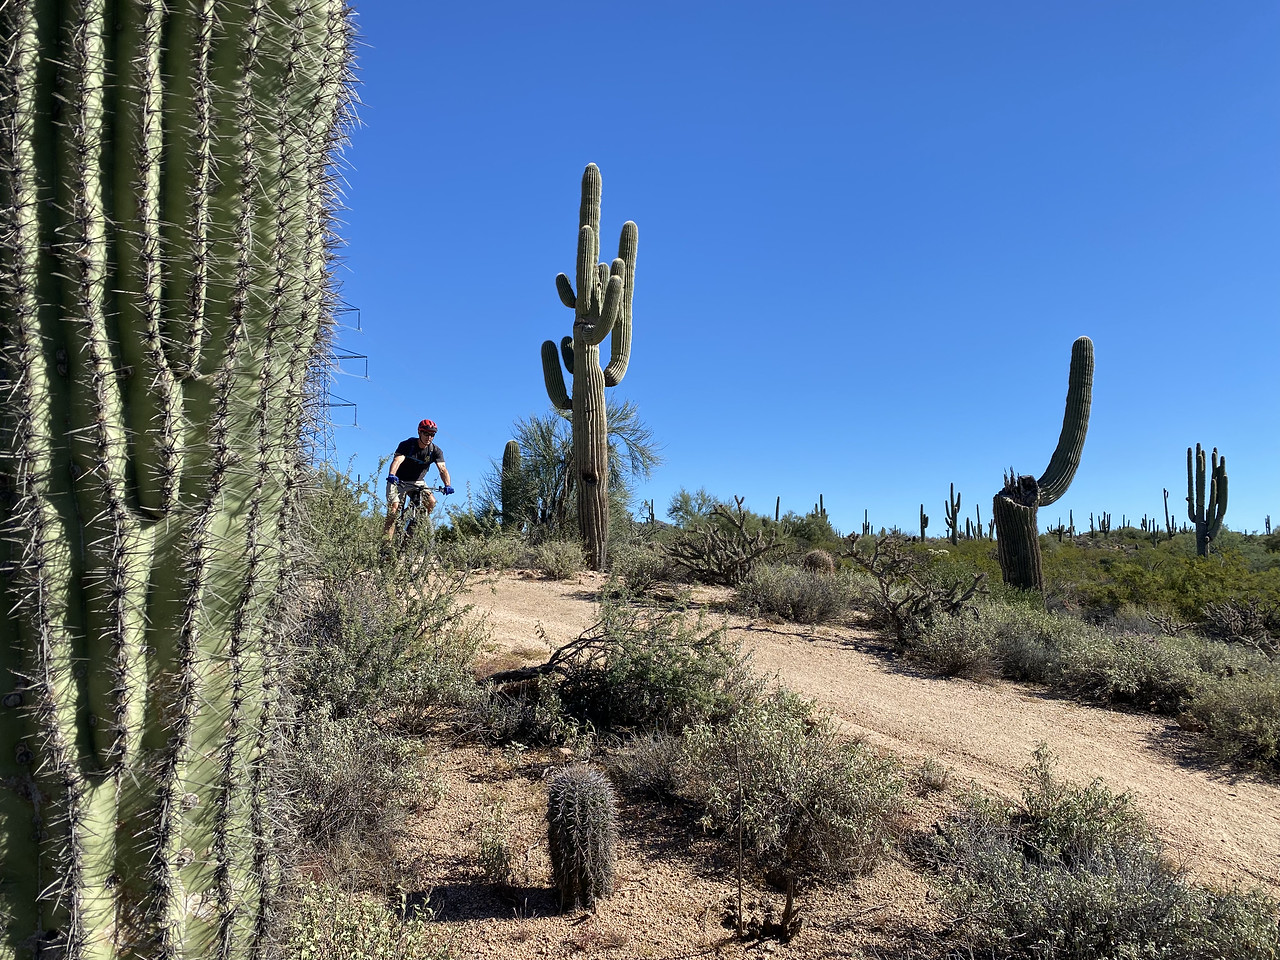 A mountain bike rider zooms down a thrilling stretch of trail flanked by several kinds of cactus on either side during a Phoenix mountain bike tour with the Wild Bunch Desert Guides. 